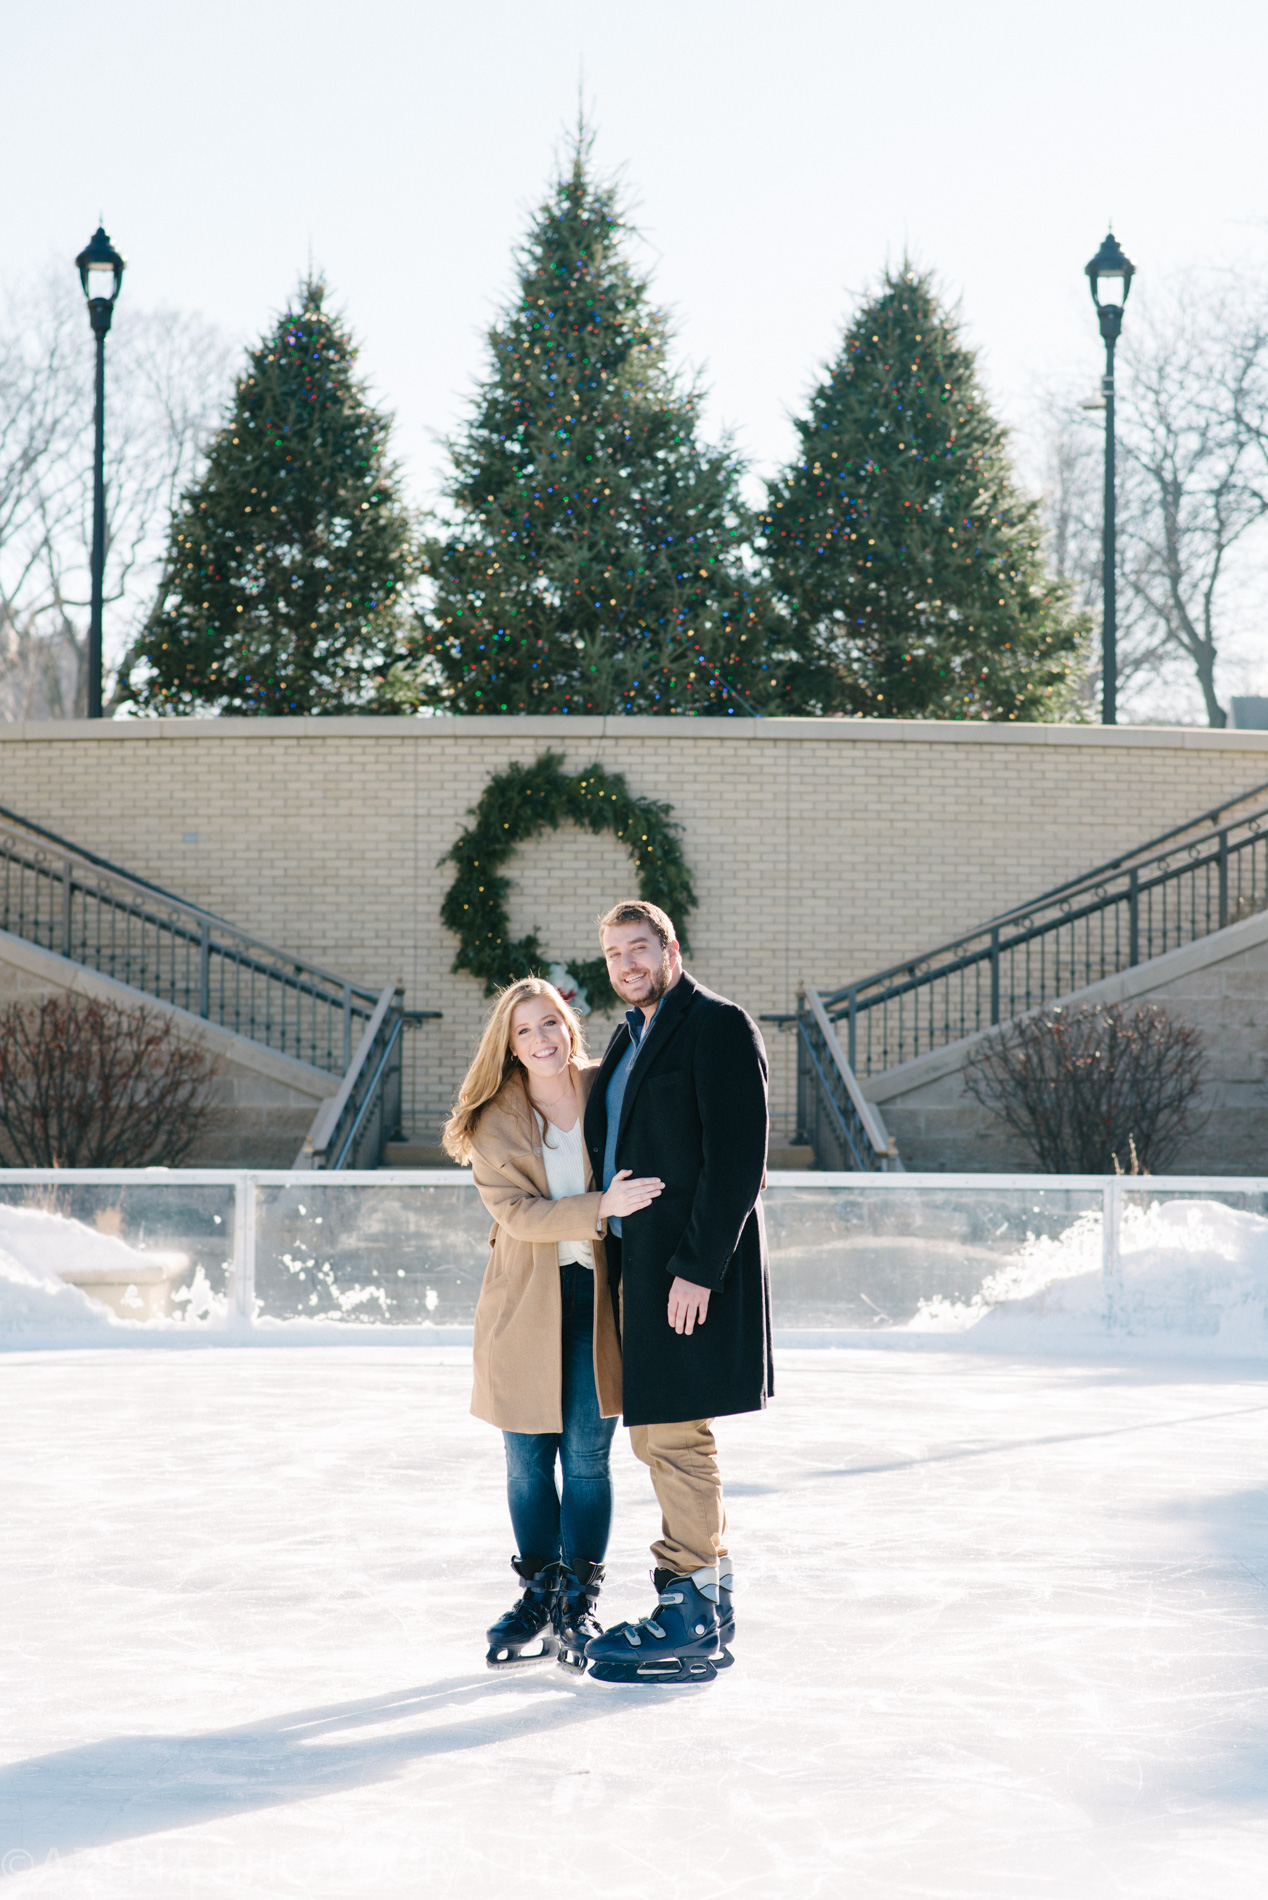 Engagement session on the ice skating rink at the Edgewater in Madison WI at Christmas